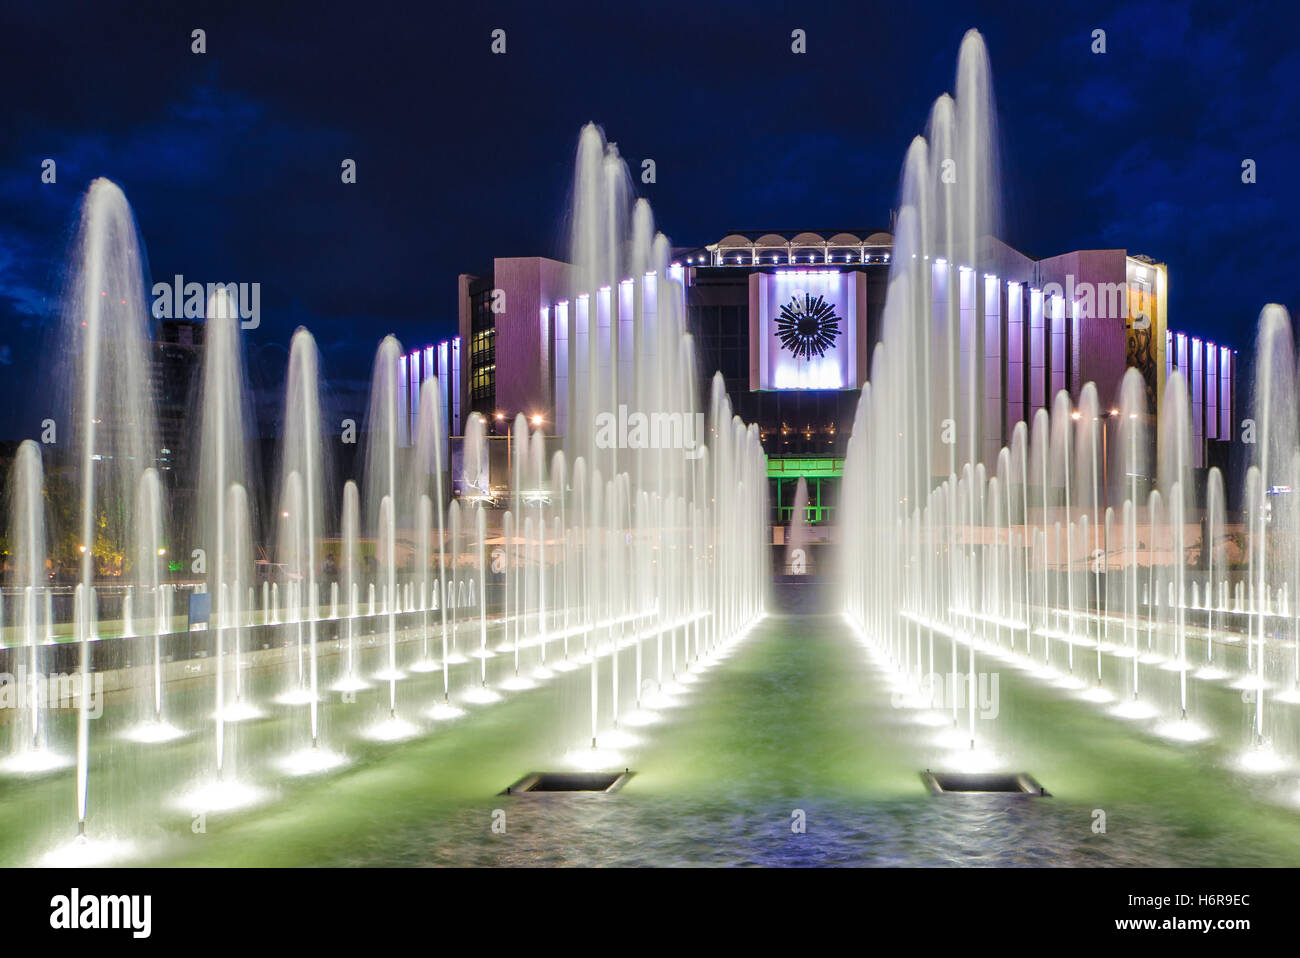 Fountain in front of the National Palace of Culture, Sofia, Bulgaria. Night scene Stock Photo